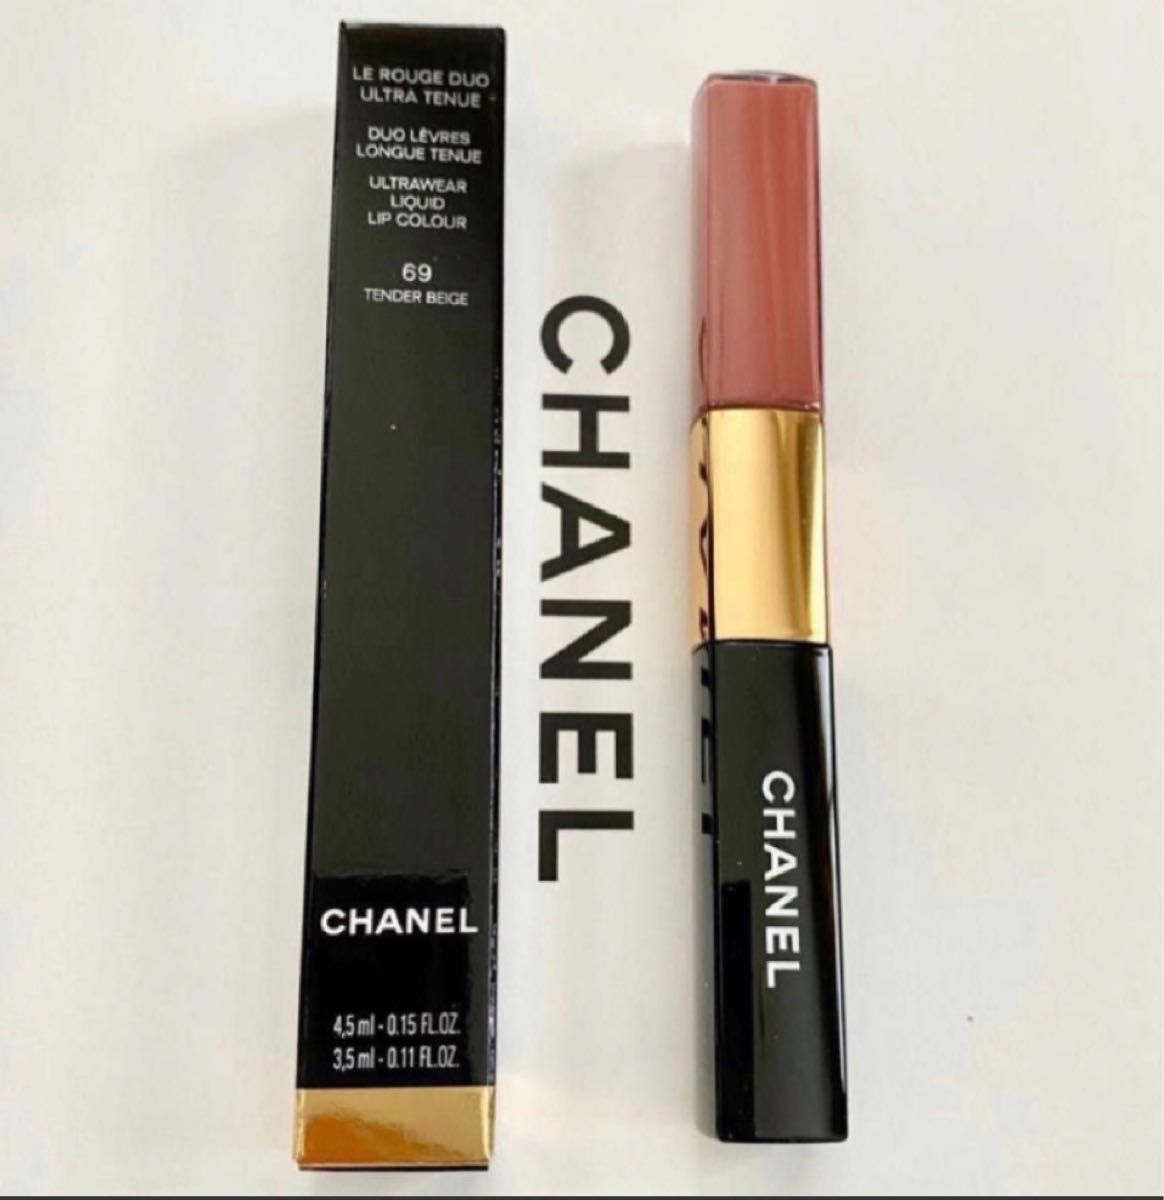 Chanel LE ROUGE DUO ULTRA TENUE #69 Tender Beige, 美容＆個人護理